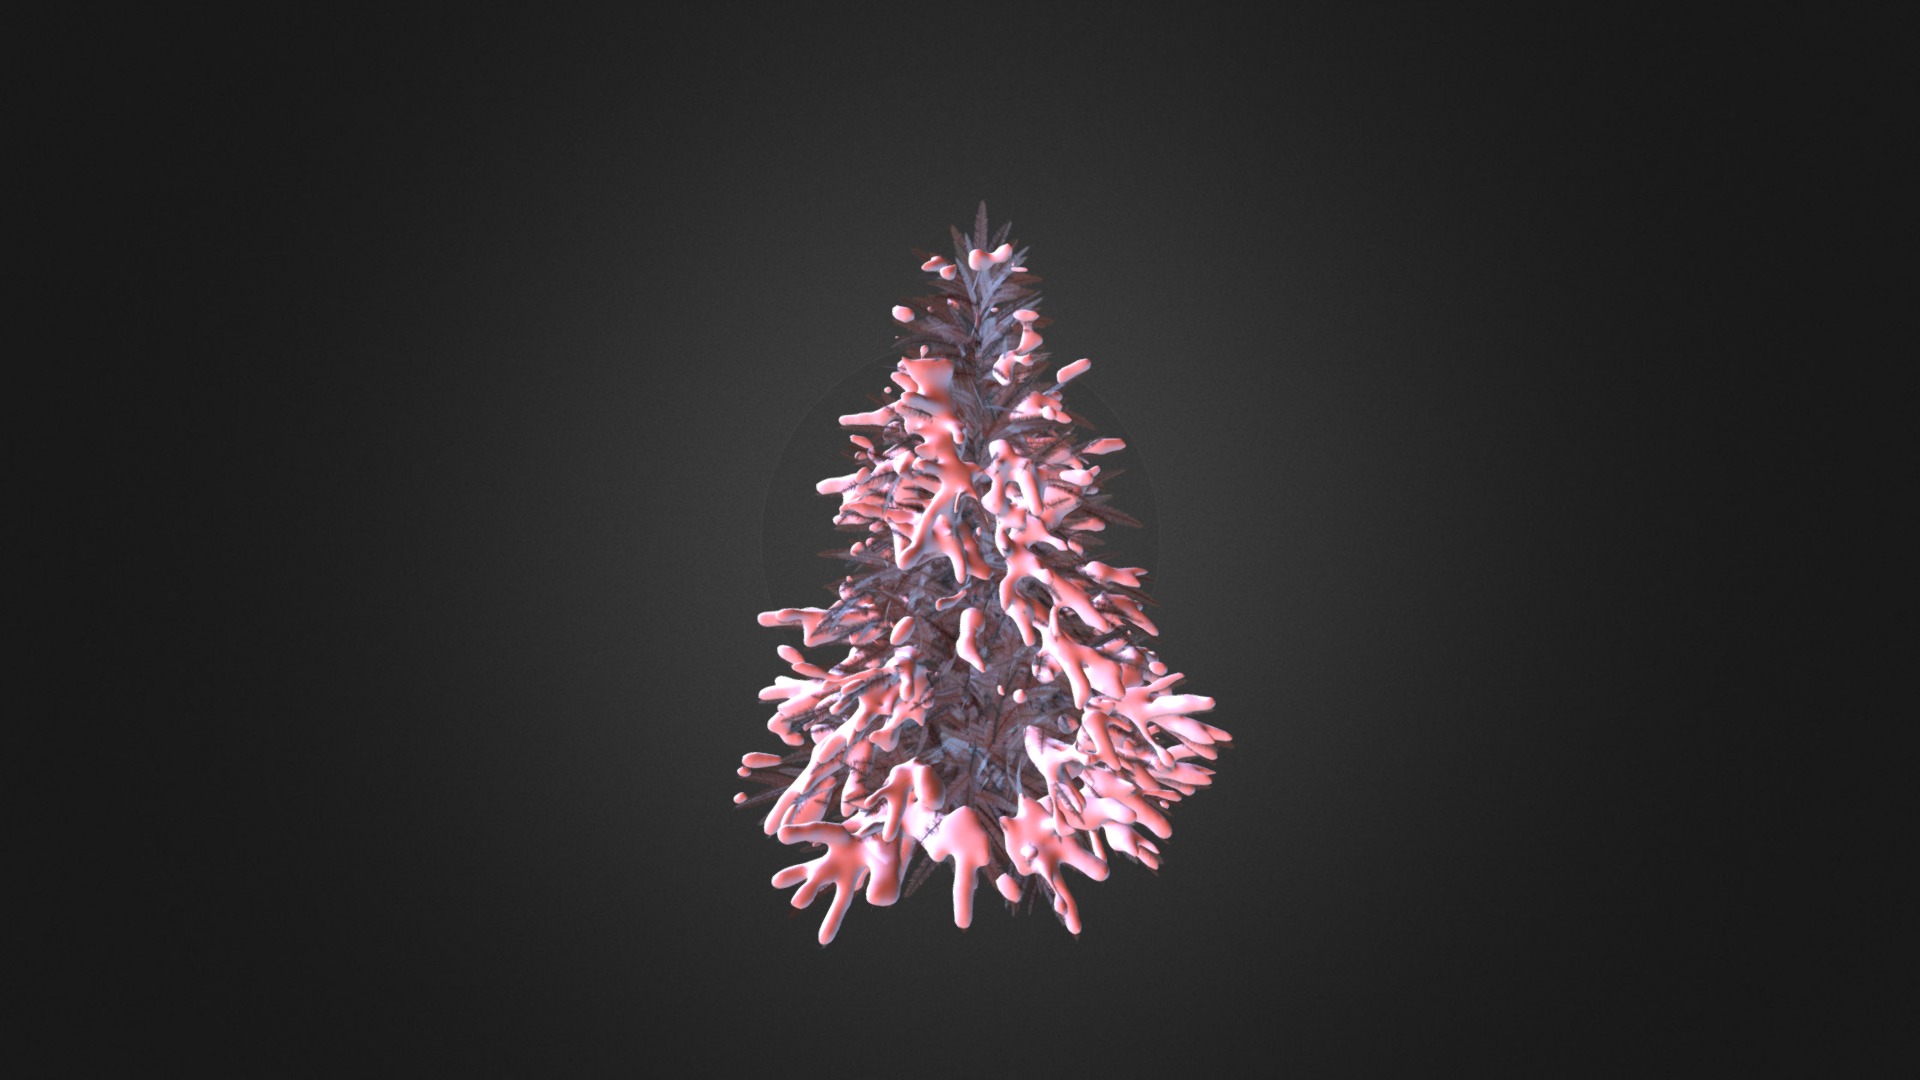 3D model Spruce Tree with Snow 3D Model 1.6m - This is a 3D model of the Spruce Tree with Snow 3D Model 1.6m. The 3D model is about a pink and black flower.